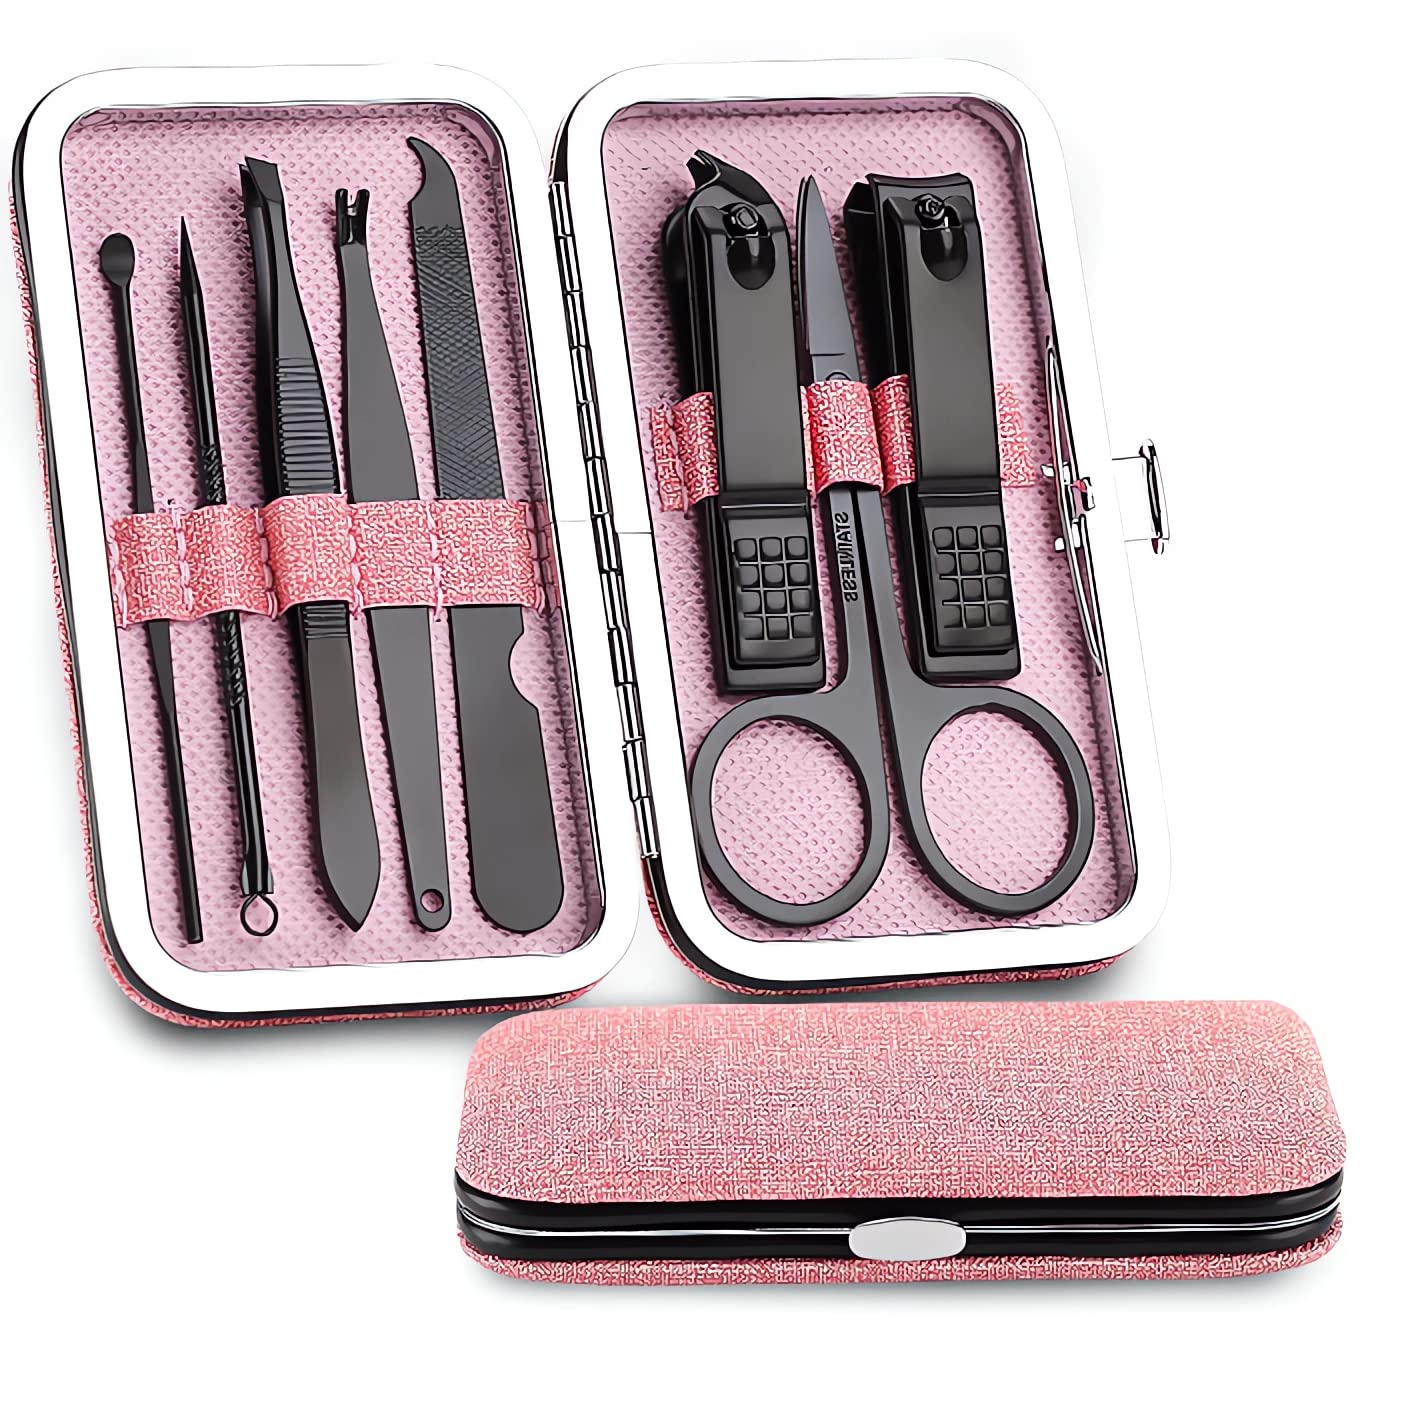 Small Travel Manicure Set for Men and Women | Nail Set Perfect for Feet and Fingernails | Professional Nail Care Set in Fabric Case Perfect for Men and Women | 2023 (pink)